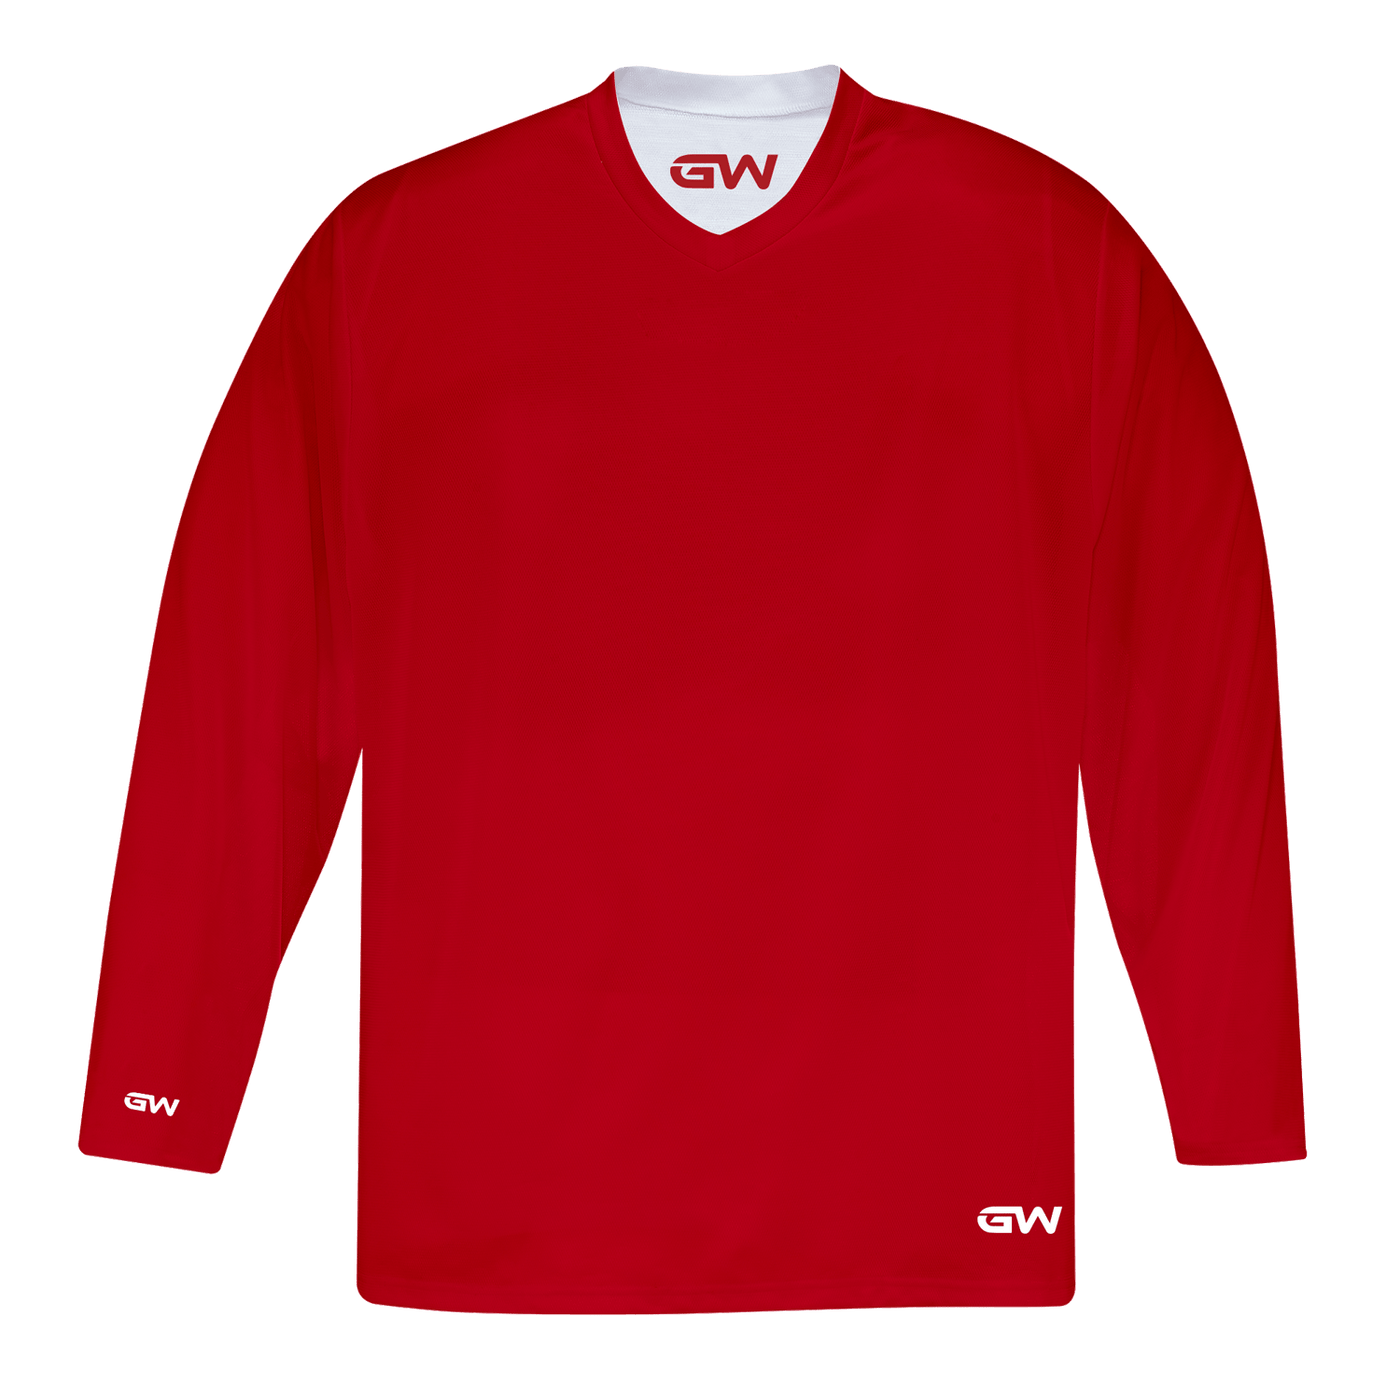 GameWear GW7500 ProLite Series Reversible Senior Hockey Practice Jersey - Red / White - The Hockey Shop Source For Sports